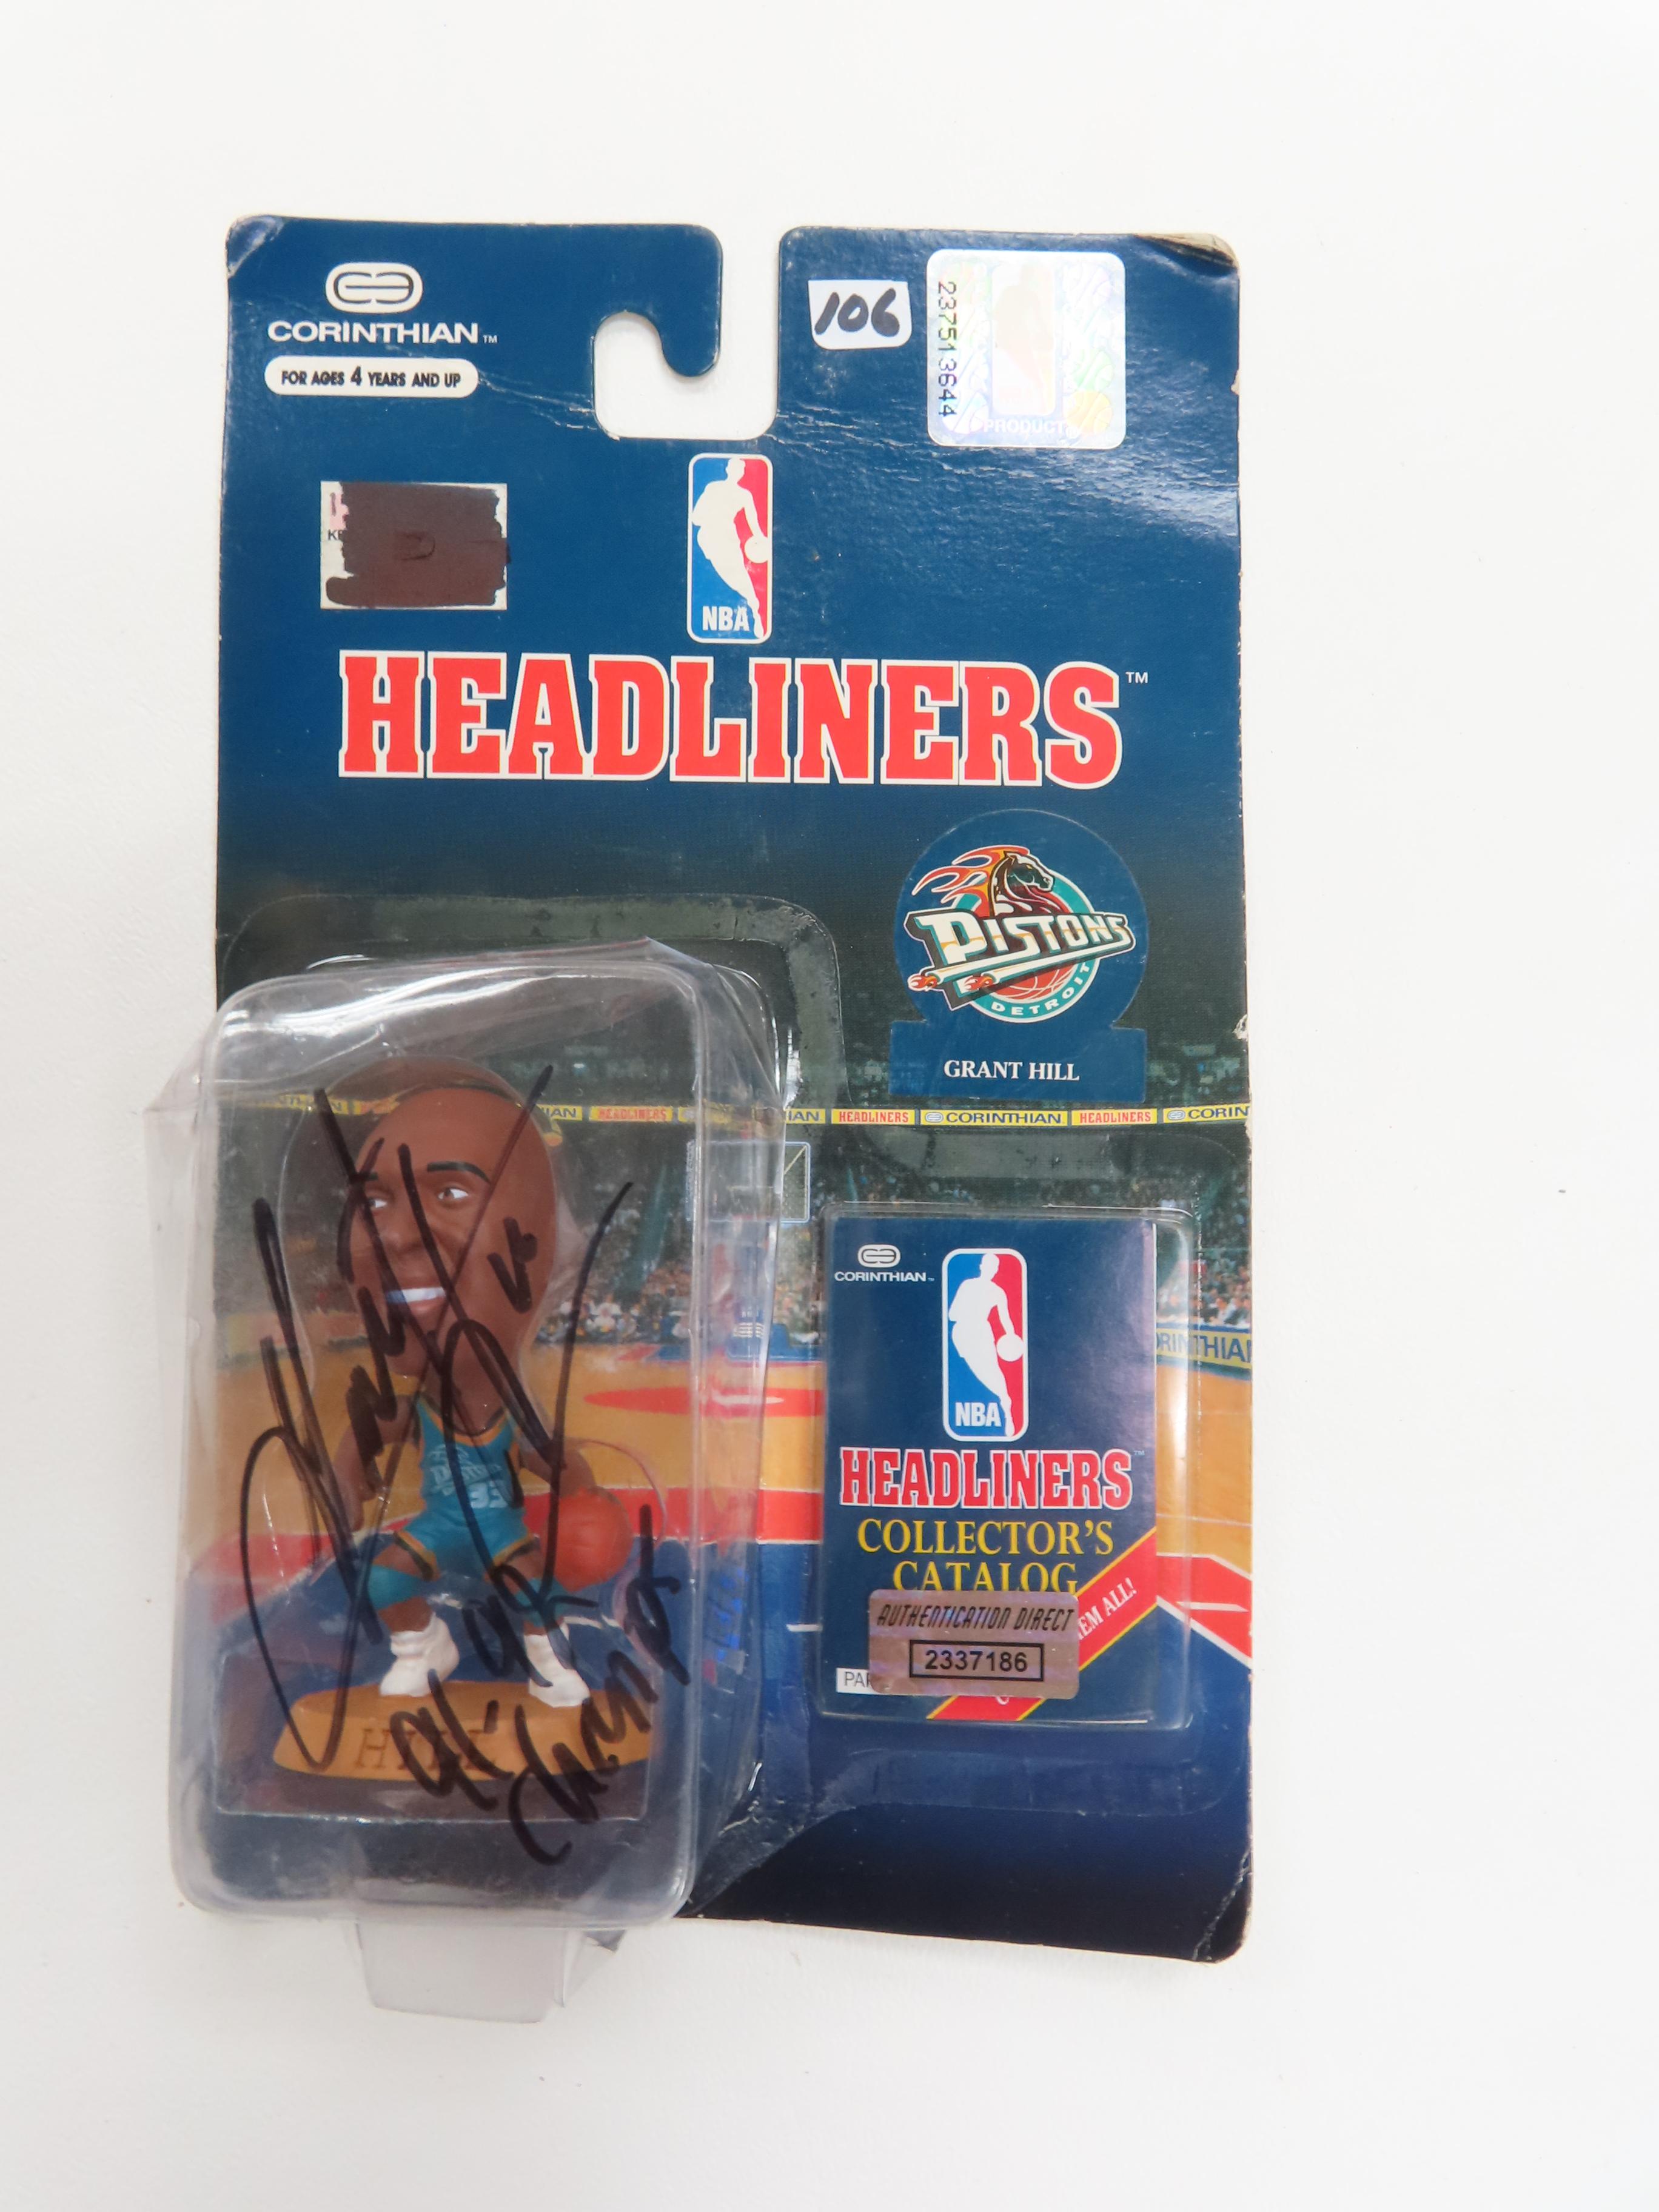 Grant Hill Signed 1996 Headliner with Authentication Direct COA (online verify)